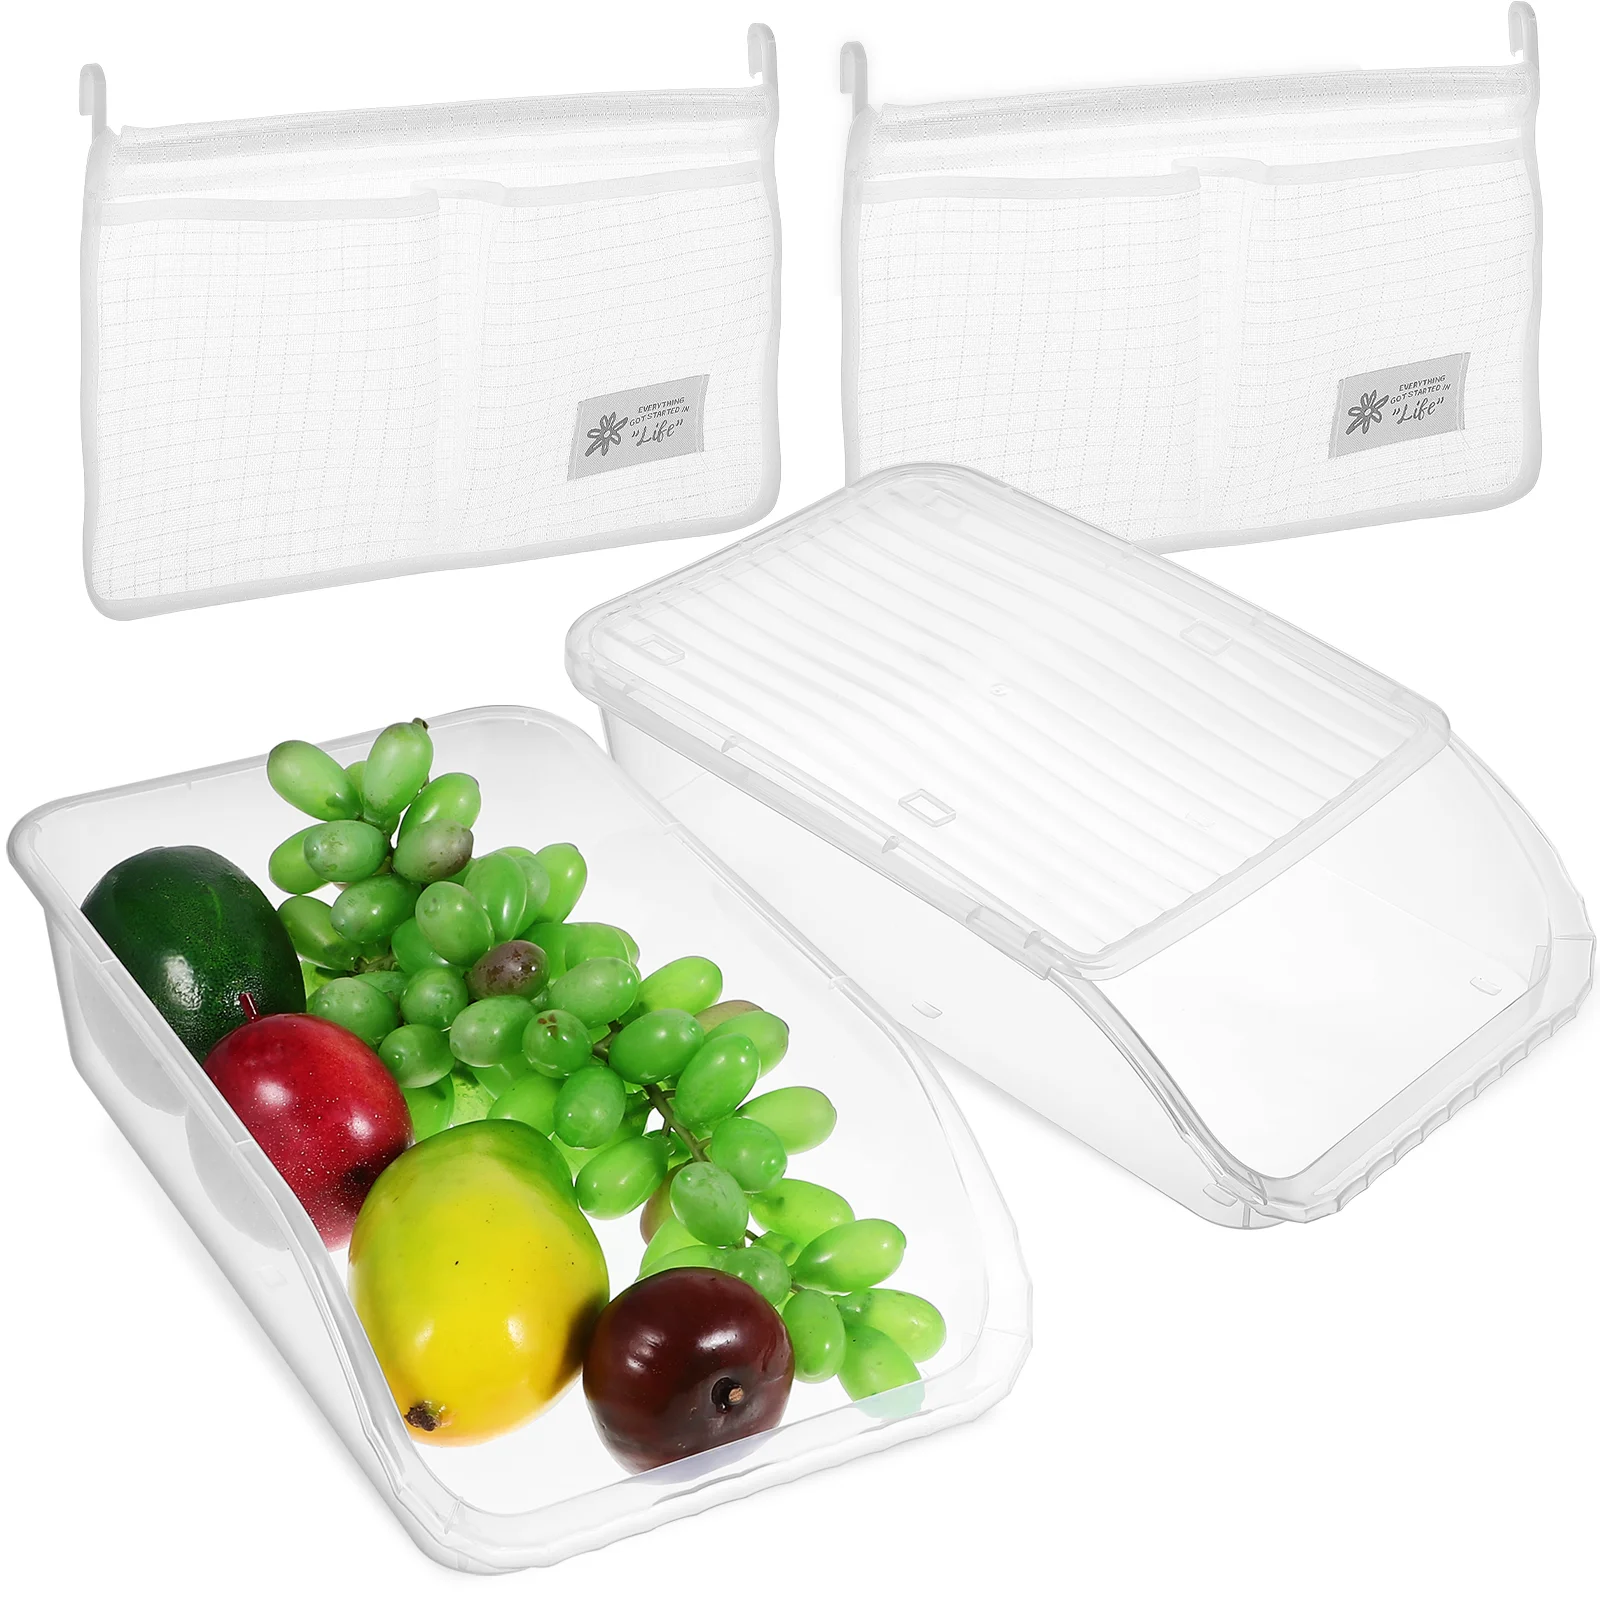 2Pcs Refrigerator Storage Boxes with Lid Kitchen Organizer Food Storage Container and 2 Mesh Bags kids girls cheerleader uniform halter neck mesh patchwork letters printed crop top with pleated skirt and 2pcs flower balls